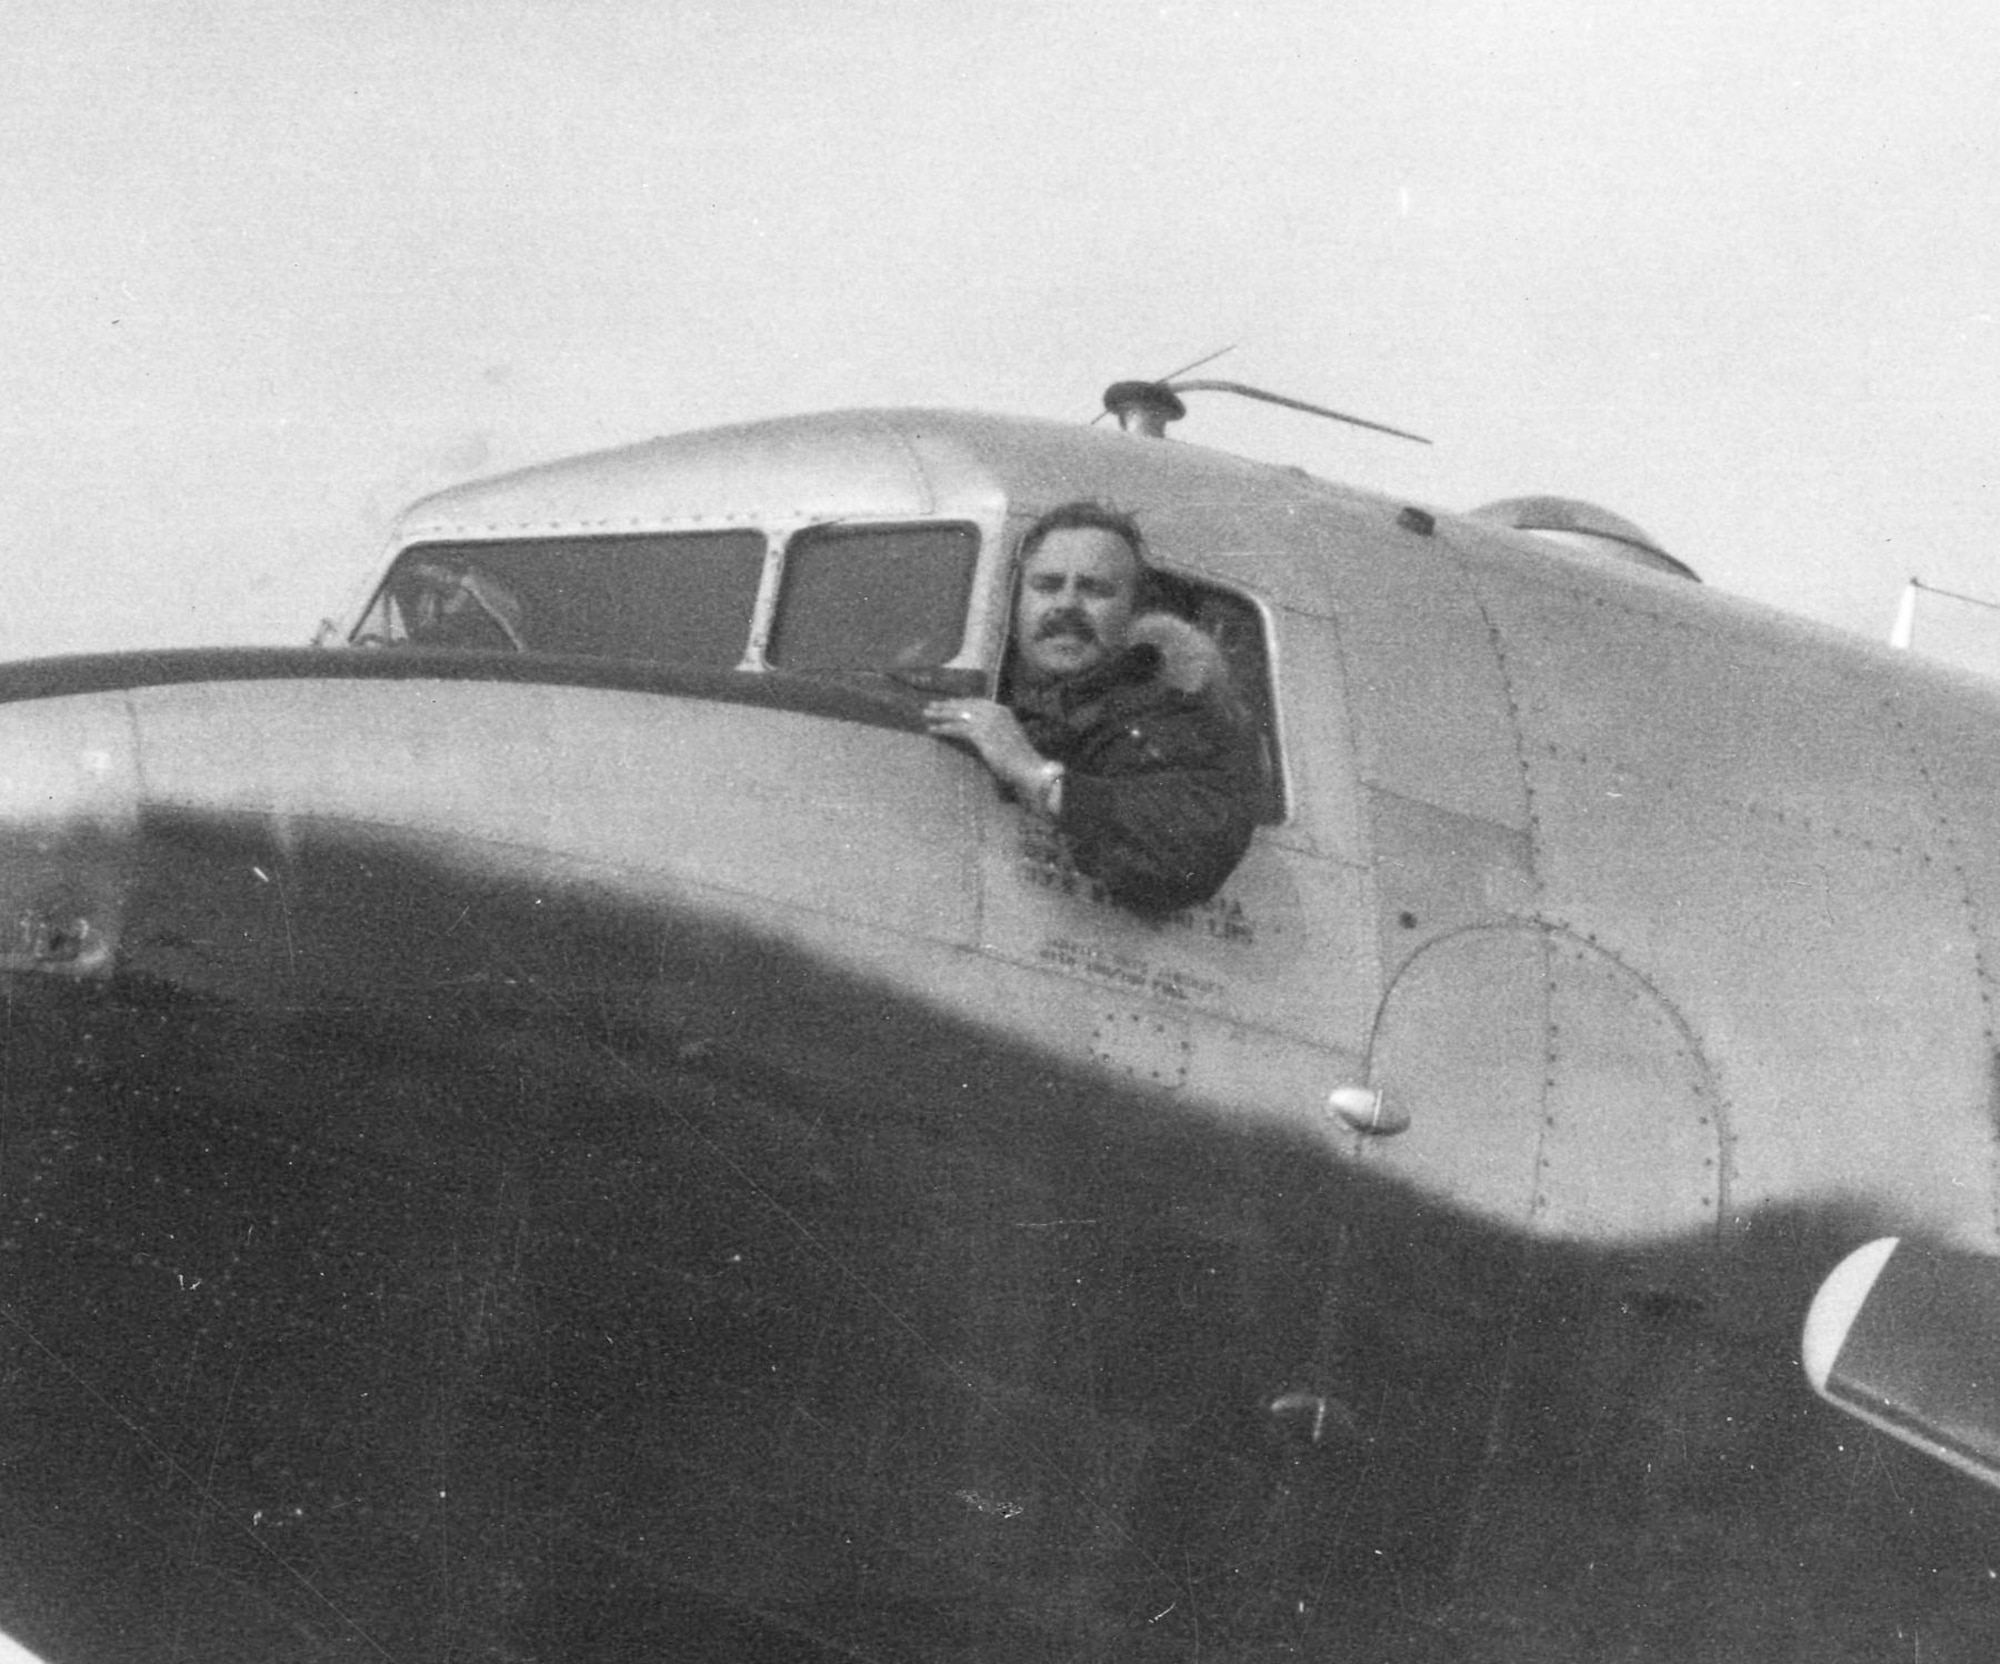 1st Lt. James Pragar in the cockpit of a C-47 used to drop agents and leaflets. The underside of the aircraft was painted black to make it harder to see from the ground at night. (U.S. Air Force photo)